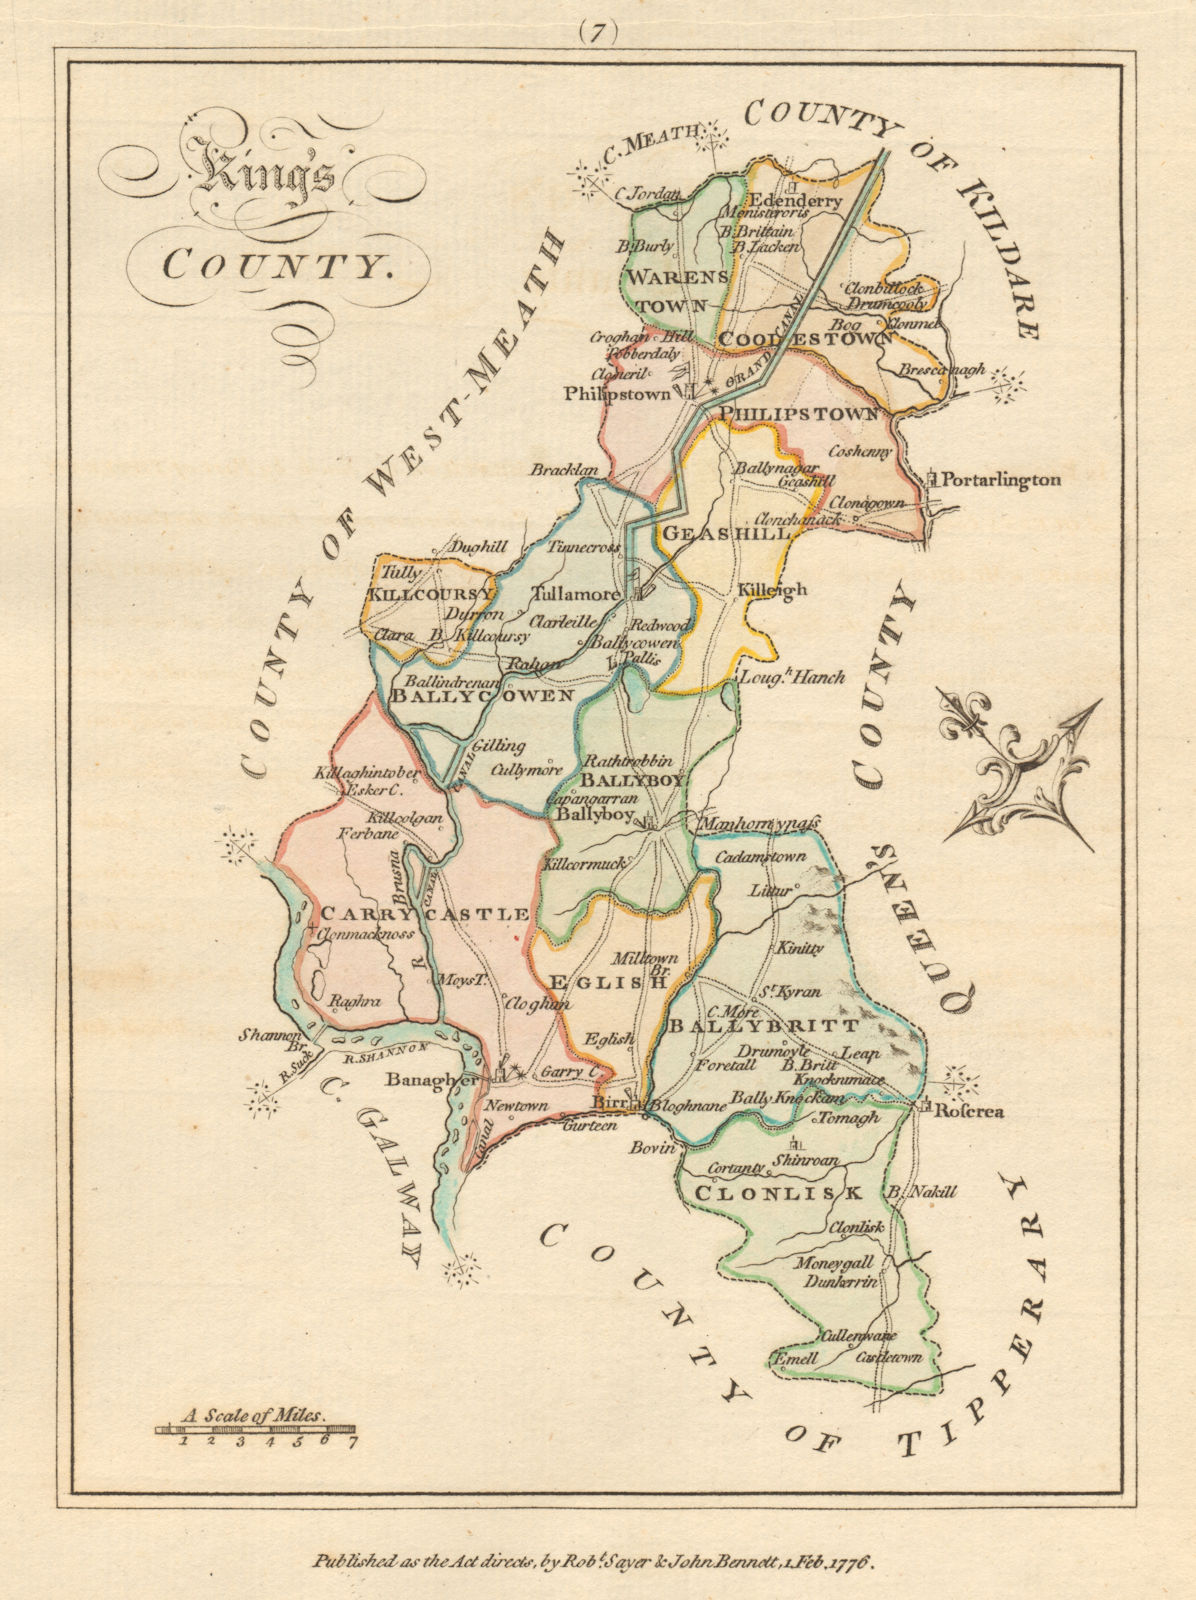 Kings County (Offaly), Leinster. Antique copperplate map. Scalé / Sayer 1776